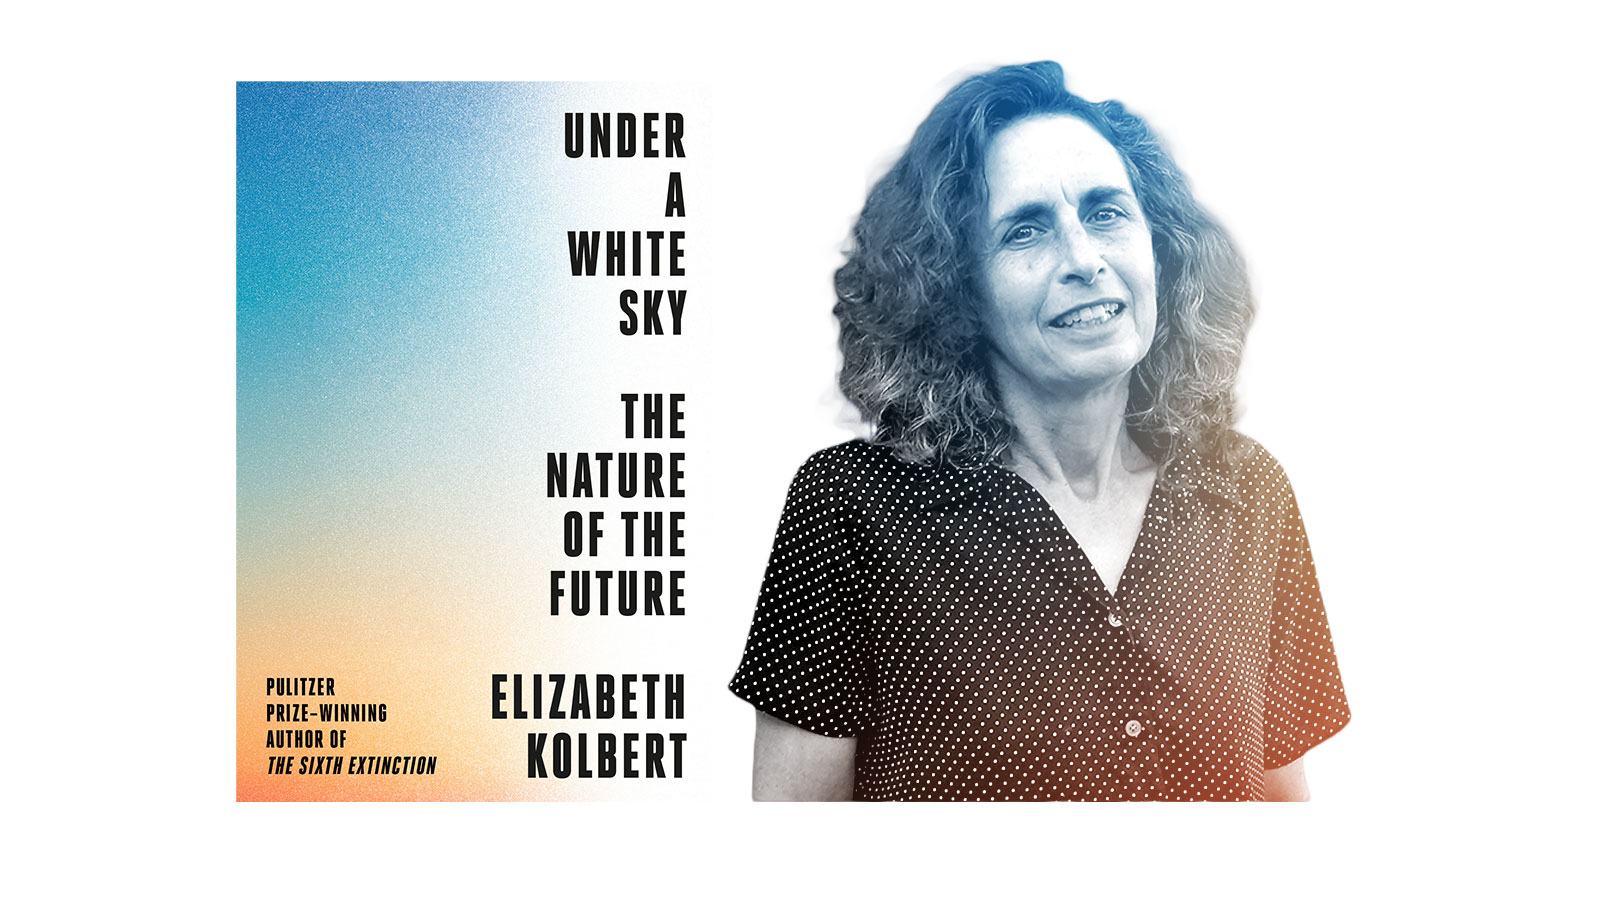 Elizabeth Kolbert wants us to rethink the stories we tell about climate change